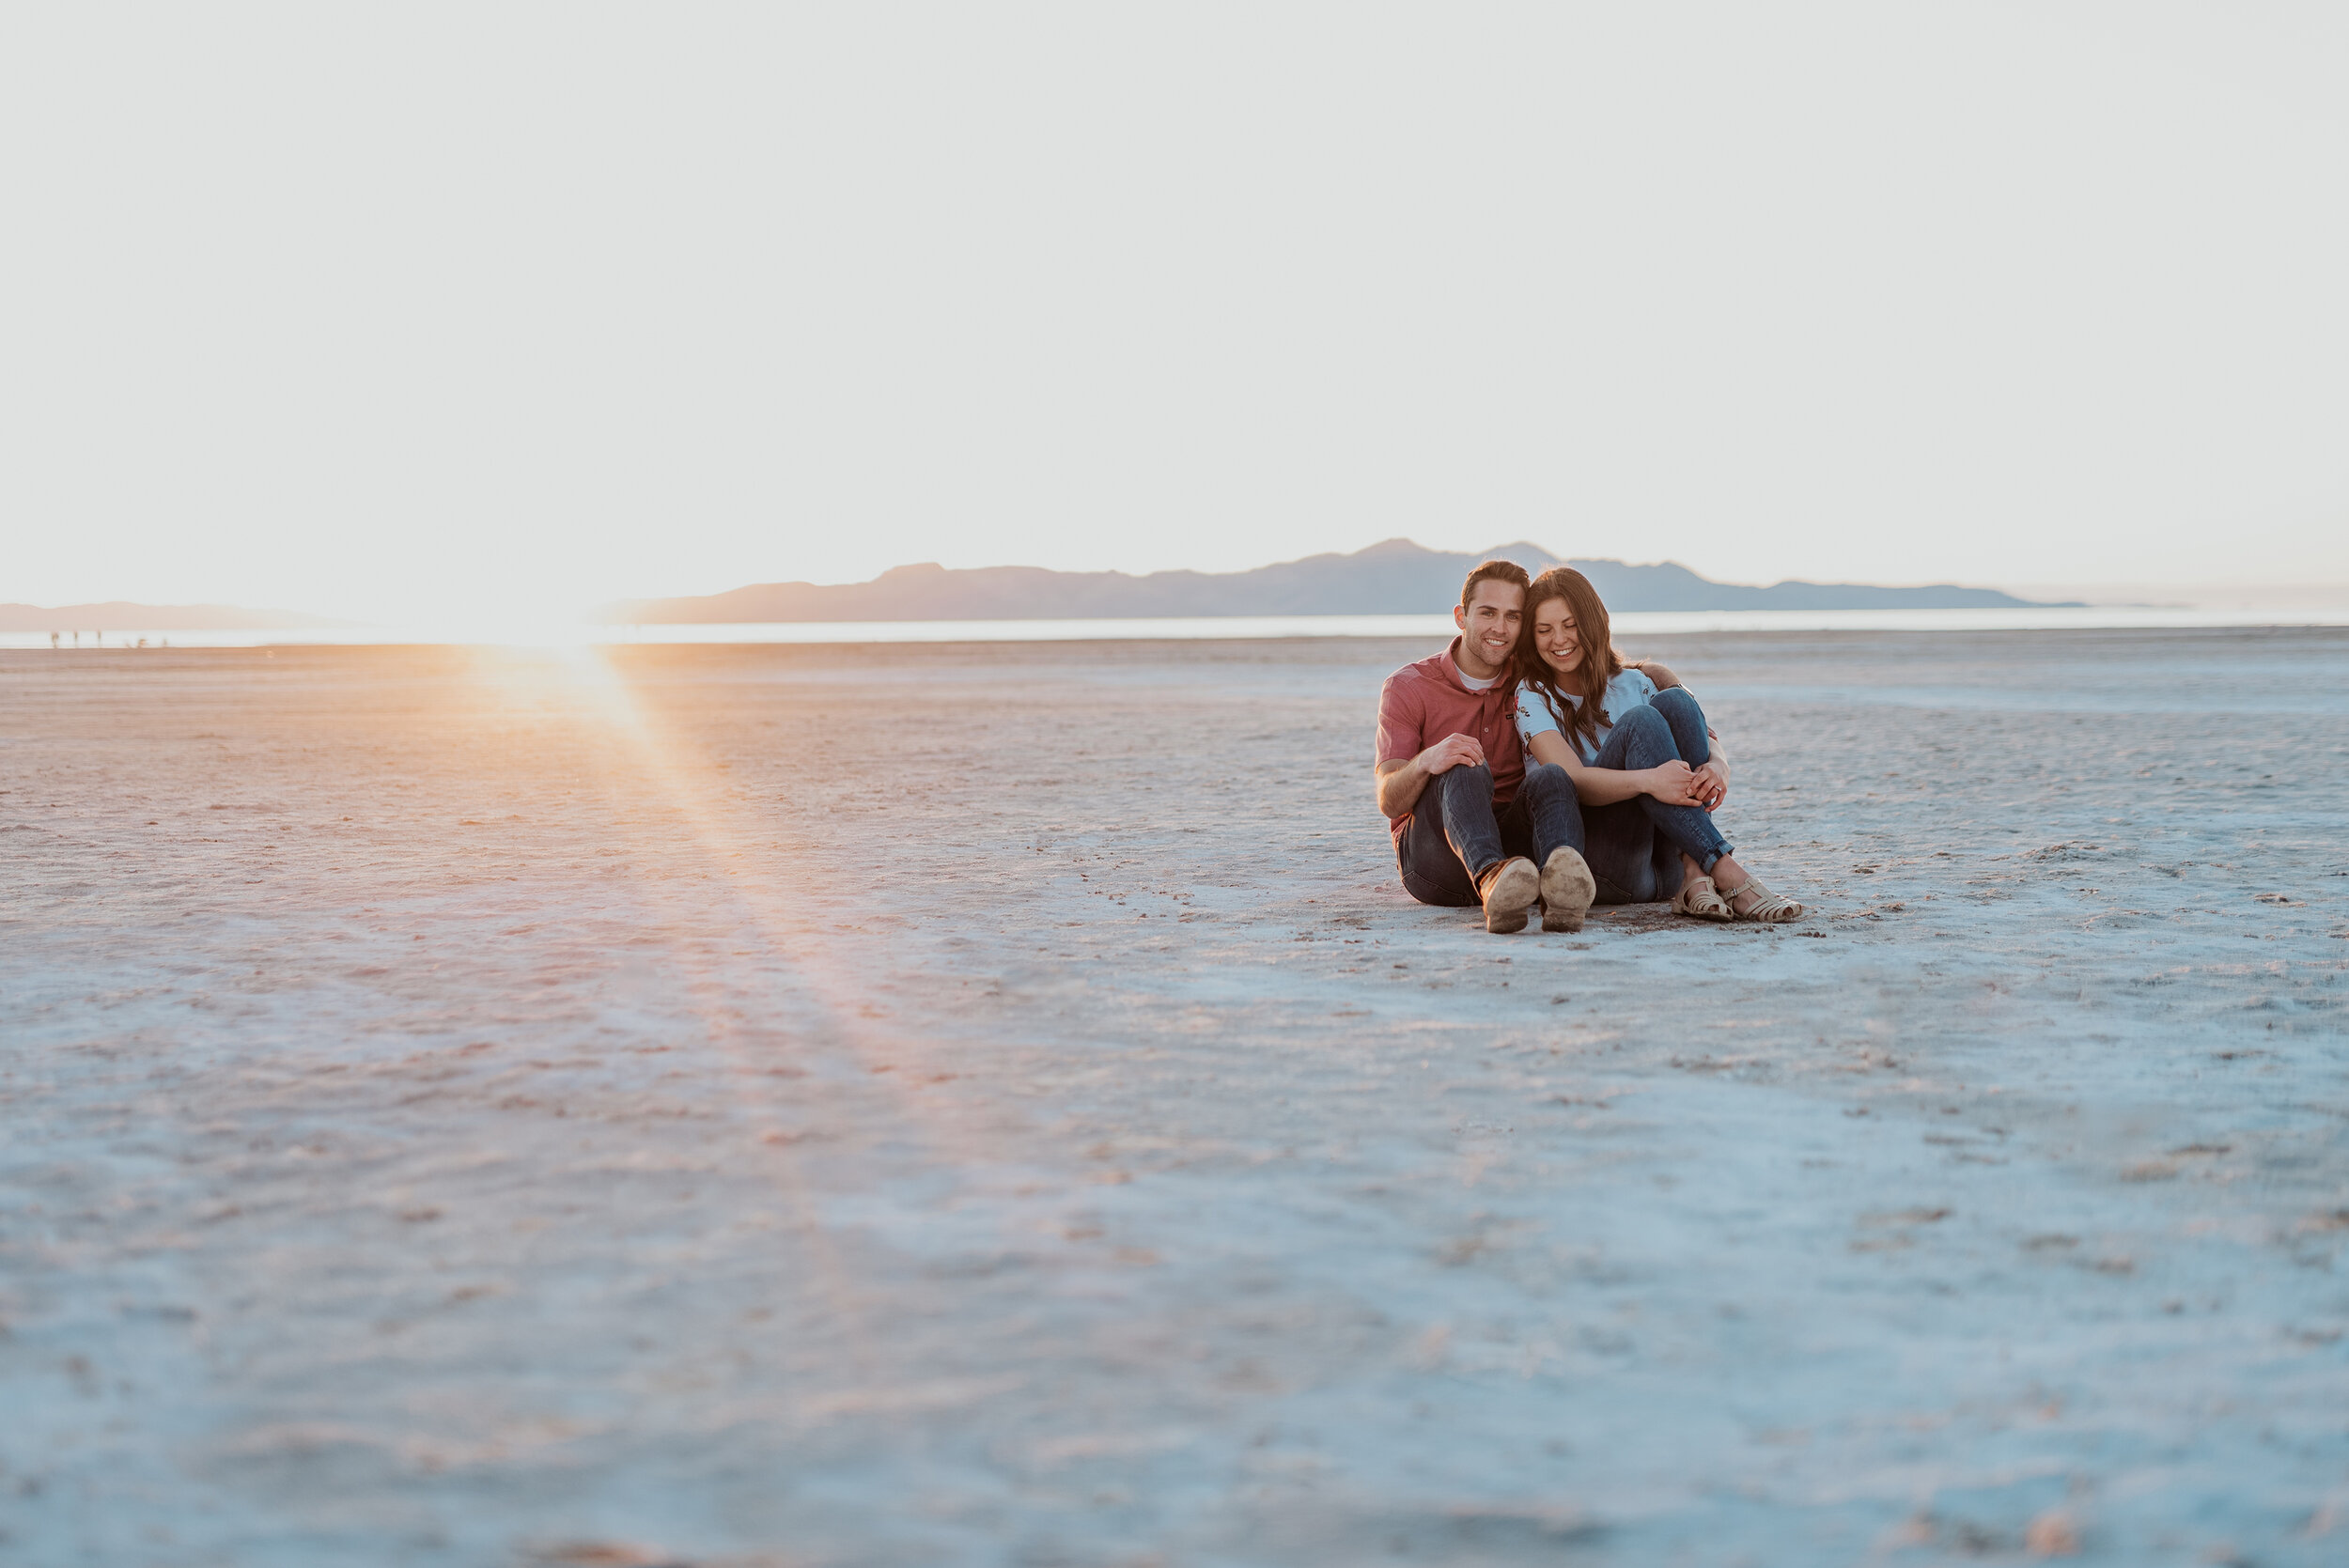 Couple sit together and laugh in saltair and on the salt flats in magna utah during their engagement photoshoot. Outdoor engagement photo ideas using the salt flats for background in photos neutral background photos salt lake city utah engagement photos couple pose by sitting on a dry lake bed #kristialysephotography #kristialyse #utahengagements #engaged #neutralbackground #engagementphotos #coupleposes #magnautah